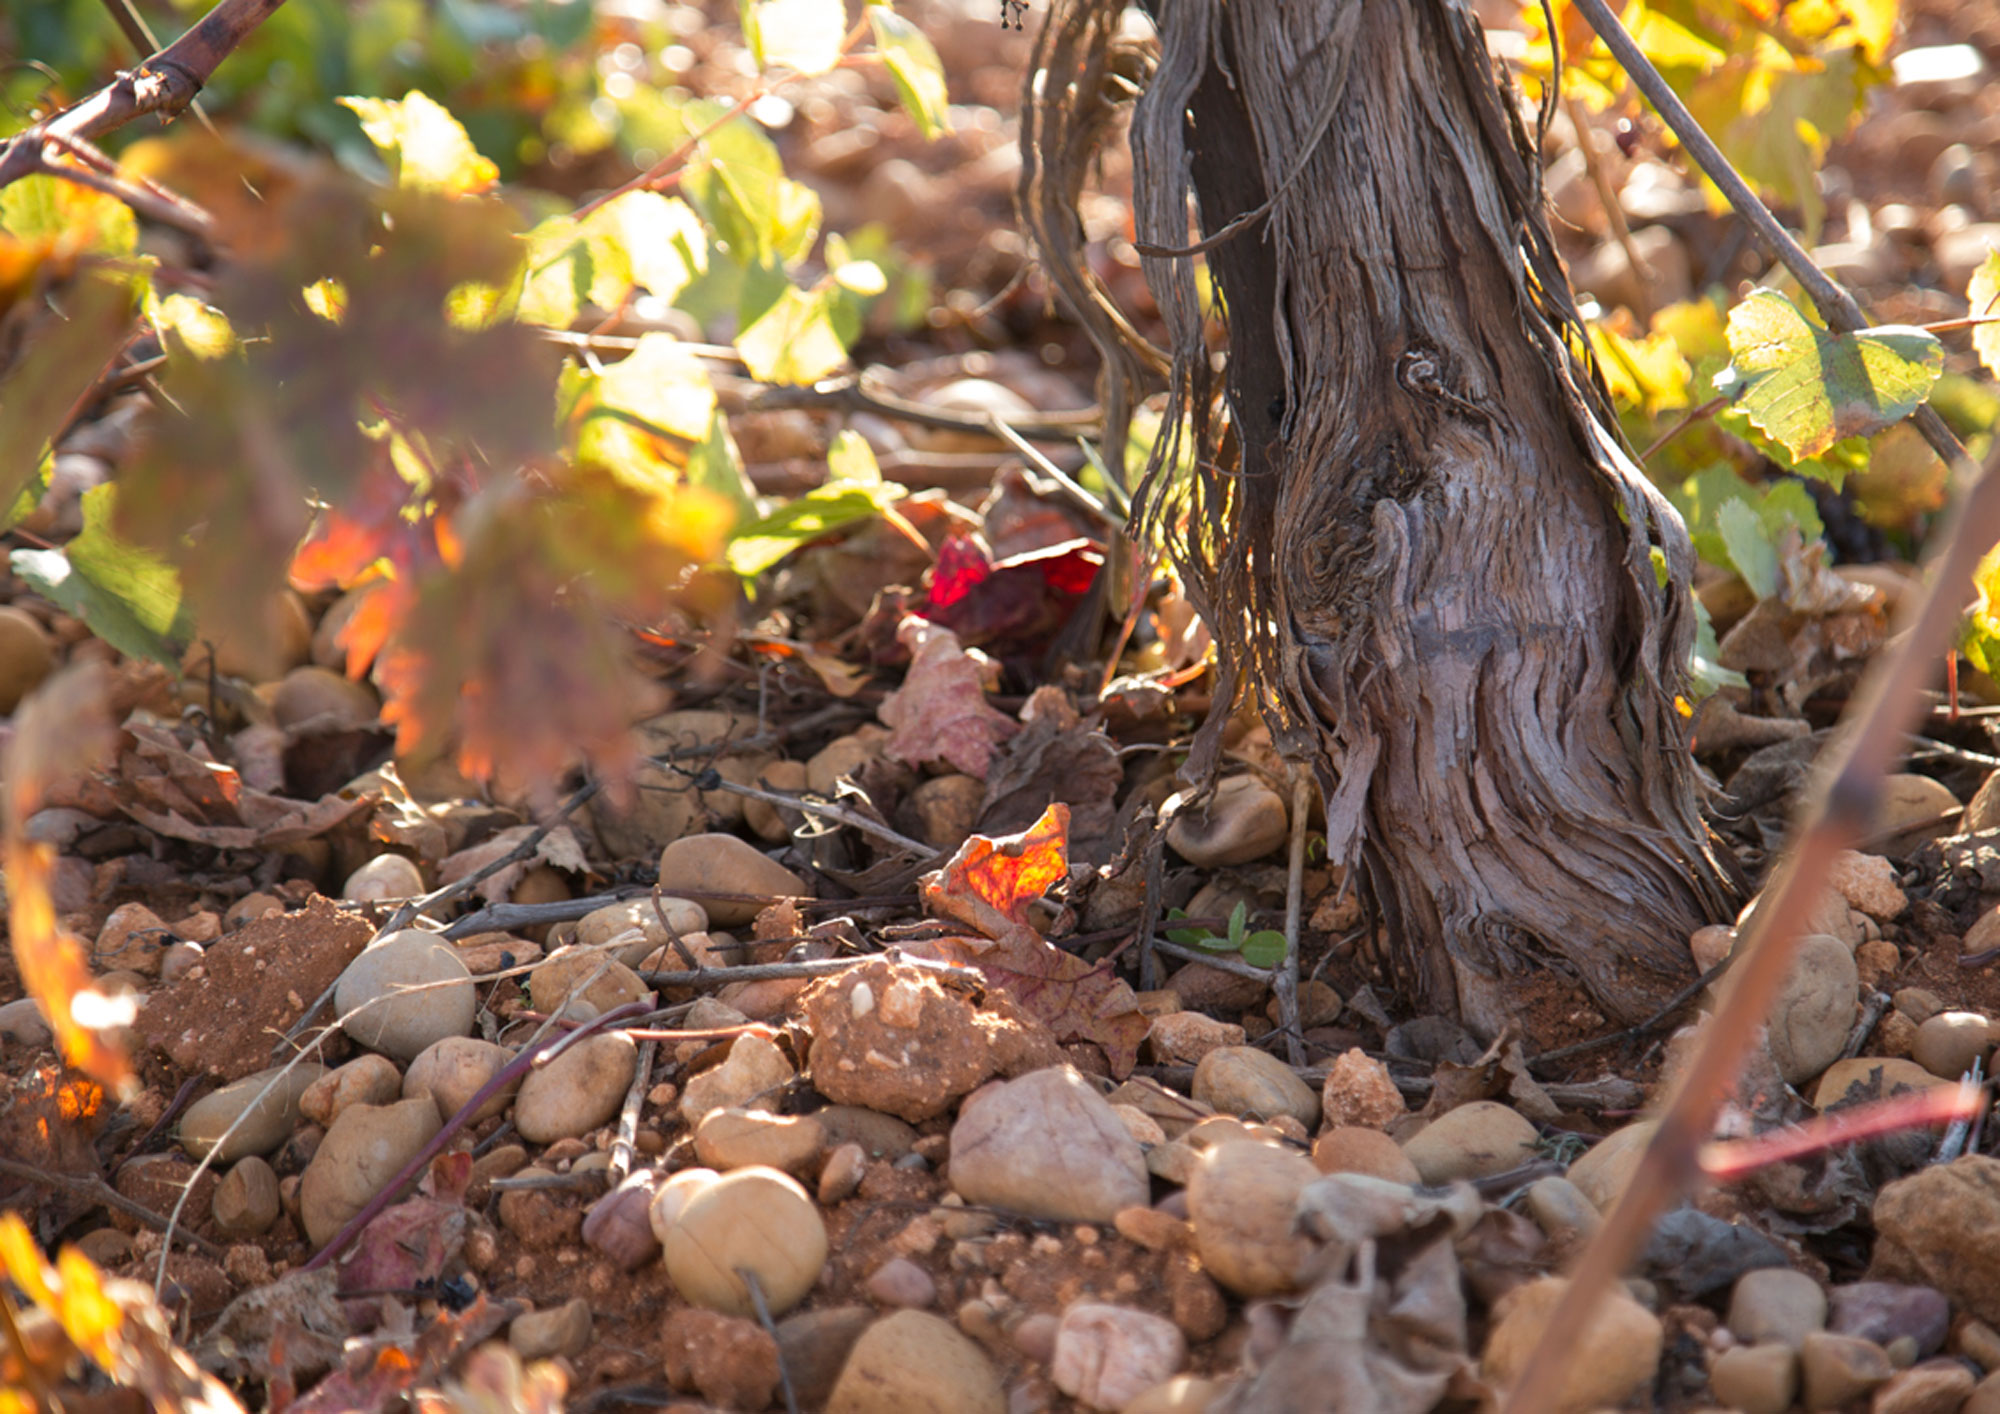 VITICULTURE ROOTED IN THE VALUES OF THE SOIL